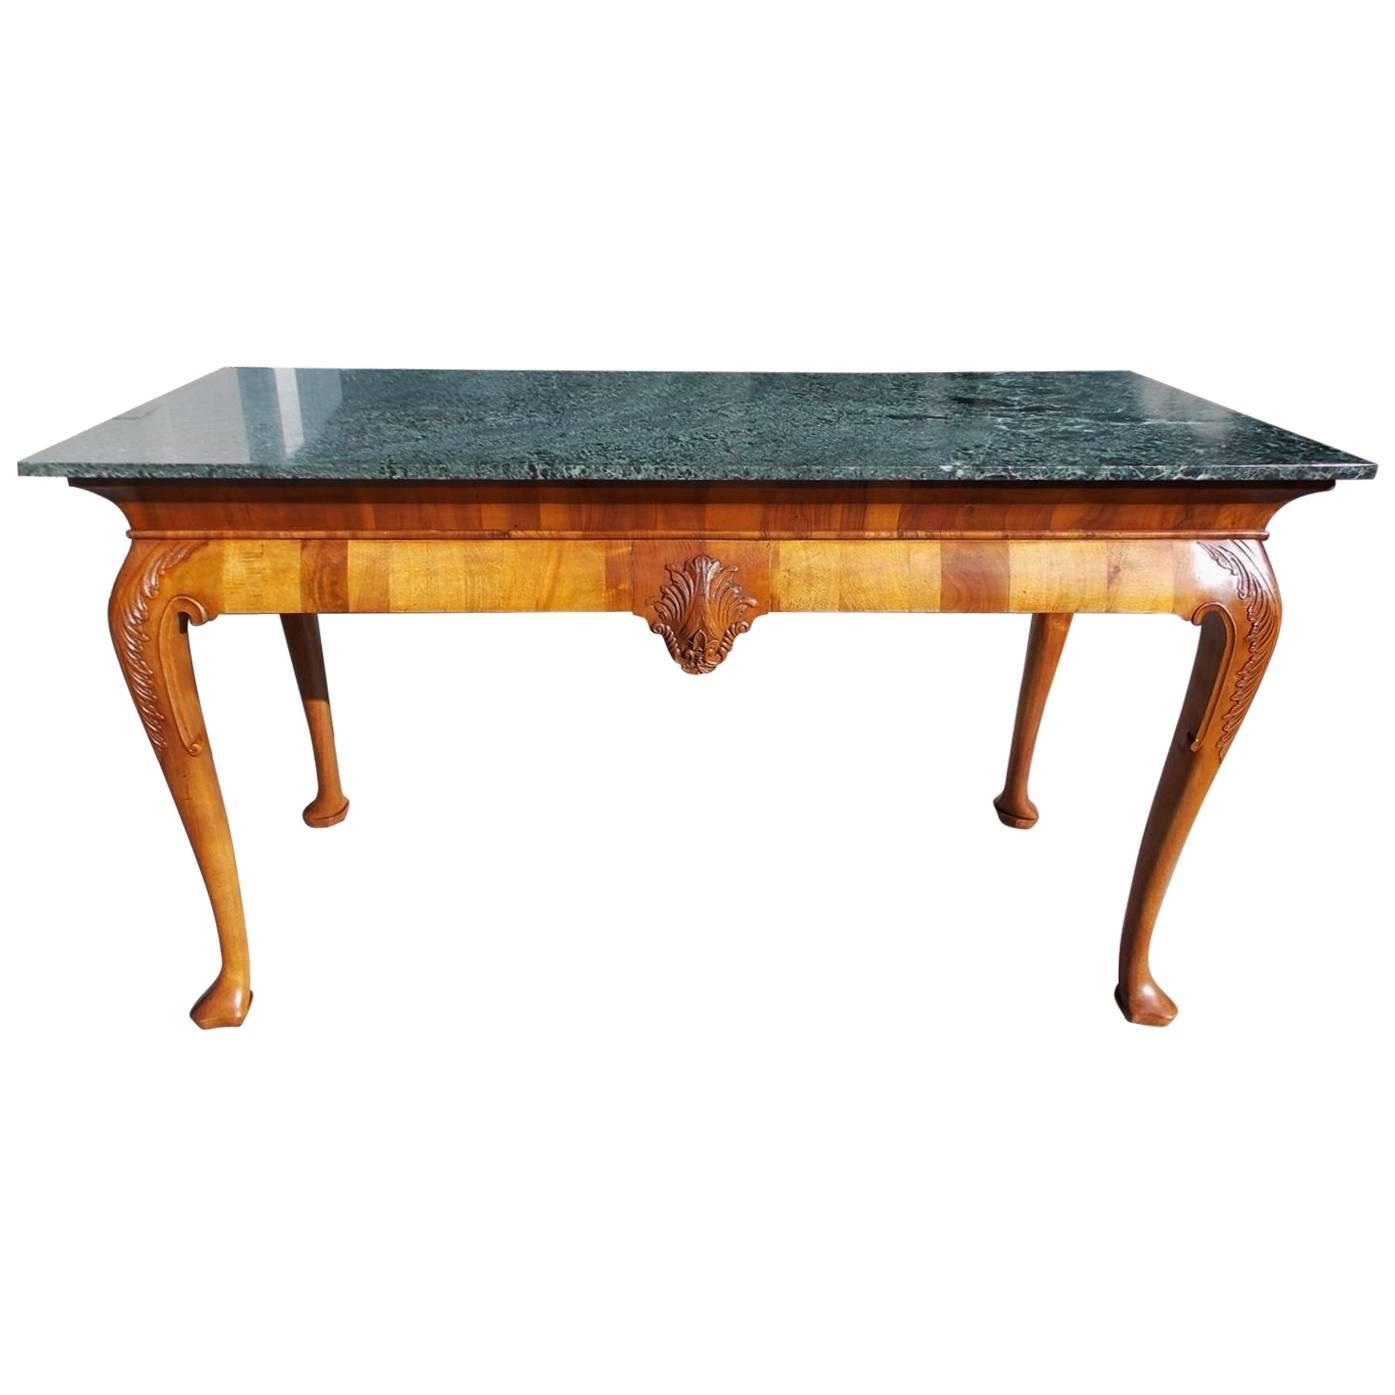 English Walnut Acanthus Carved Maurin Green Marble Top Console, Circa 1830